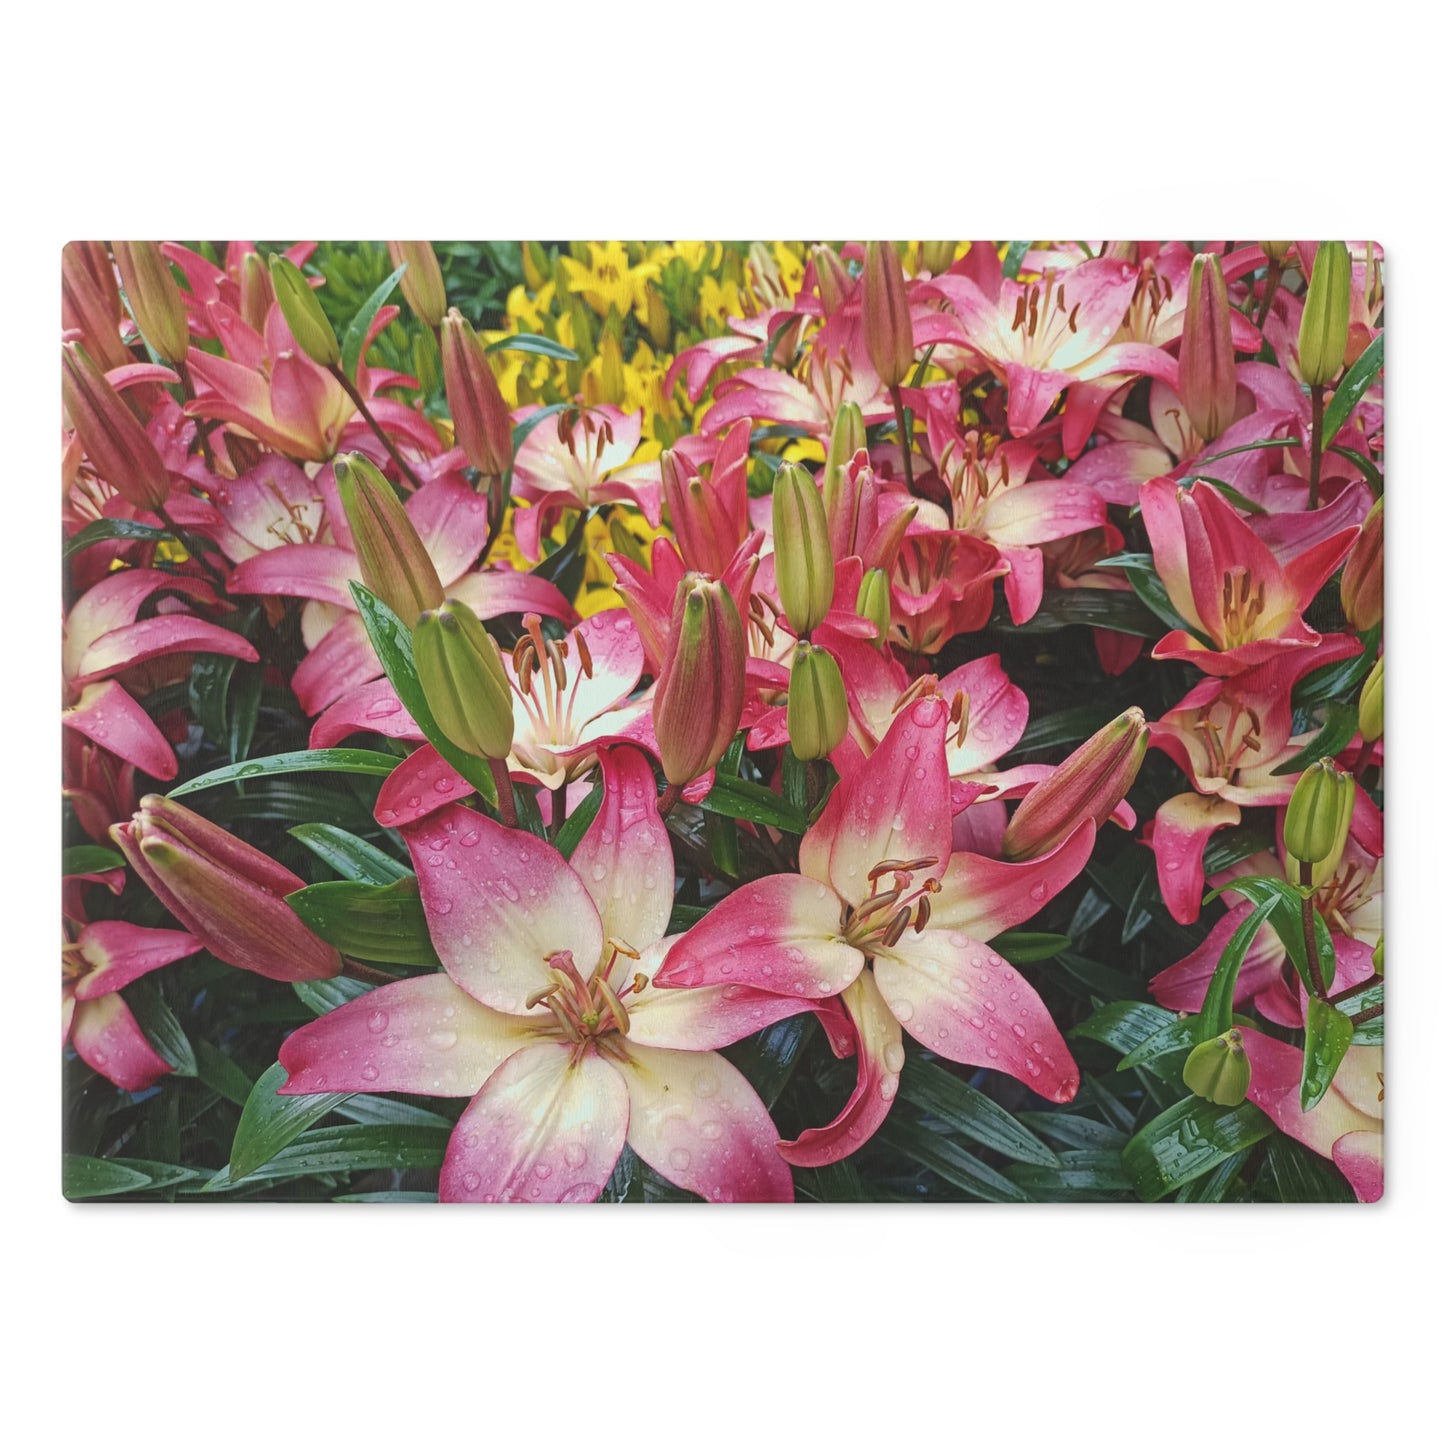 Lovely Lilies Cutting Board Dishwasher Safe